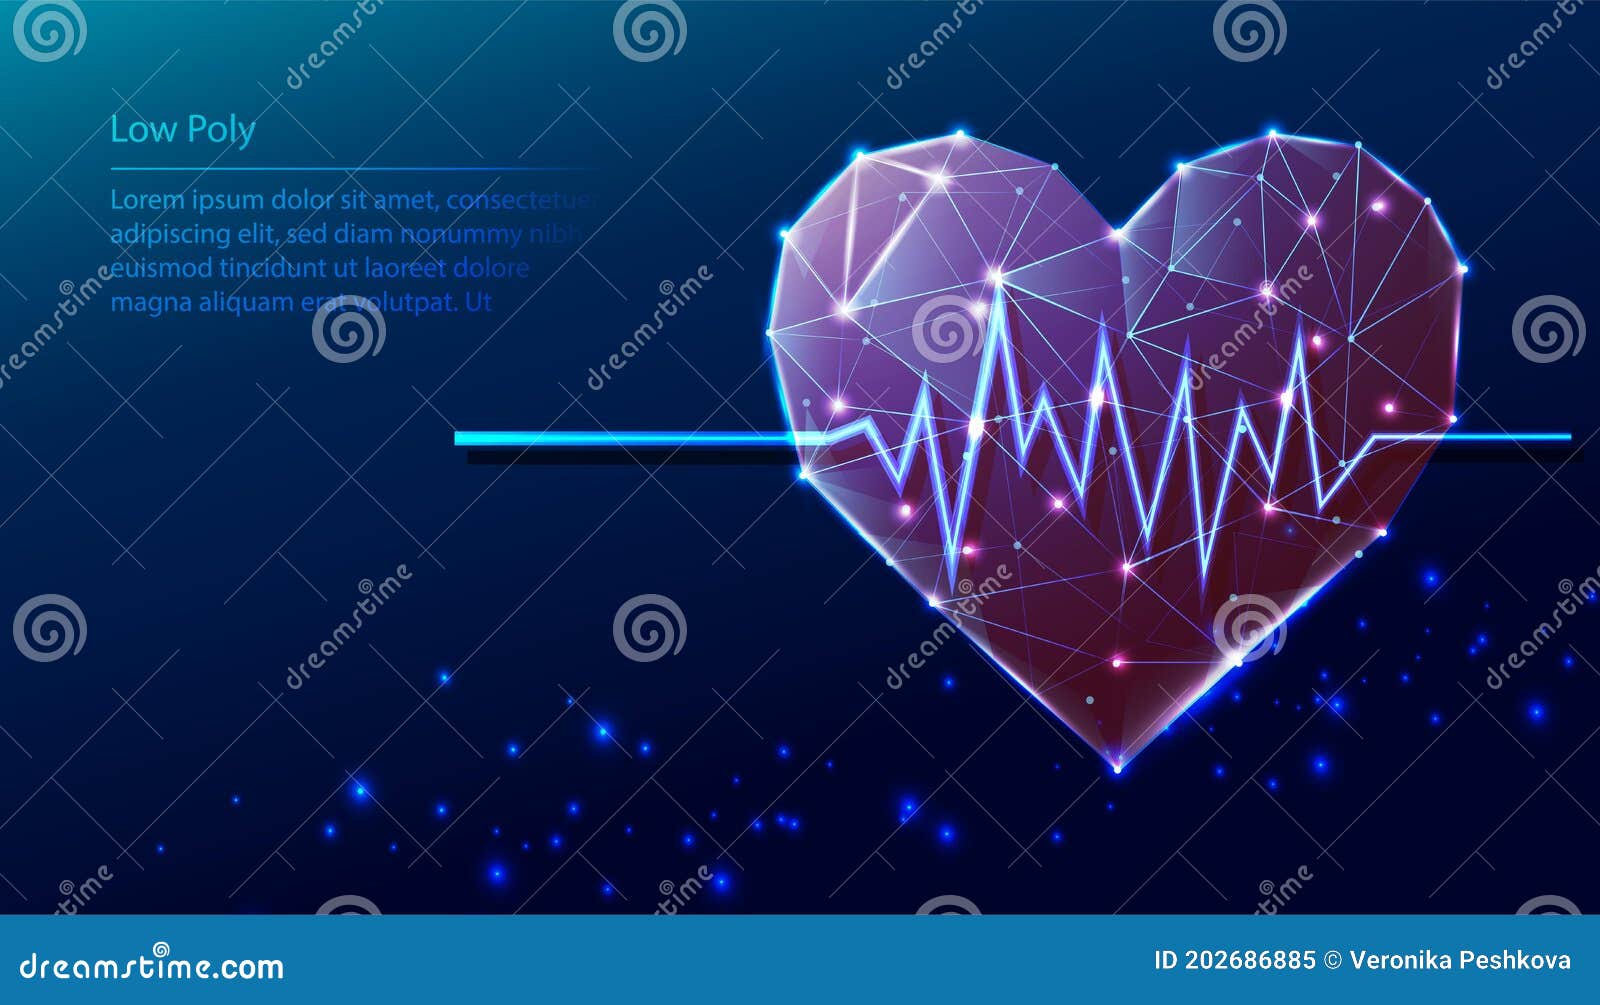  tech low poly blue background. heart  with heart beat diagramma